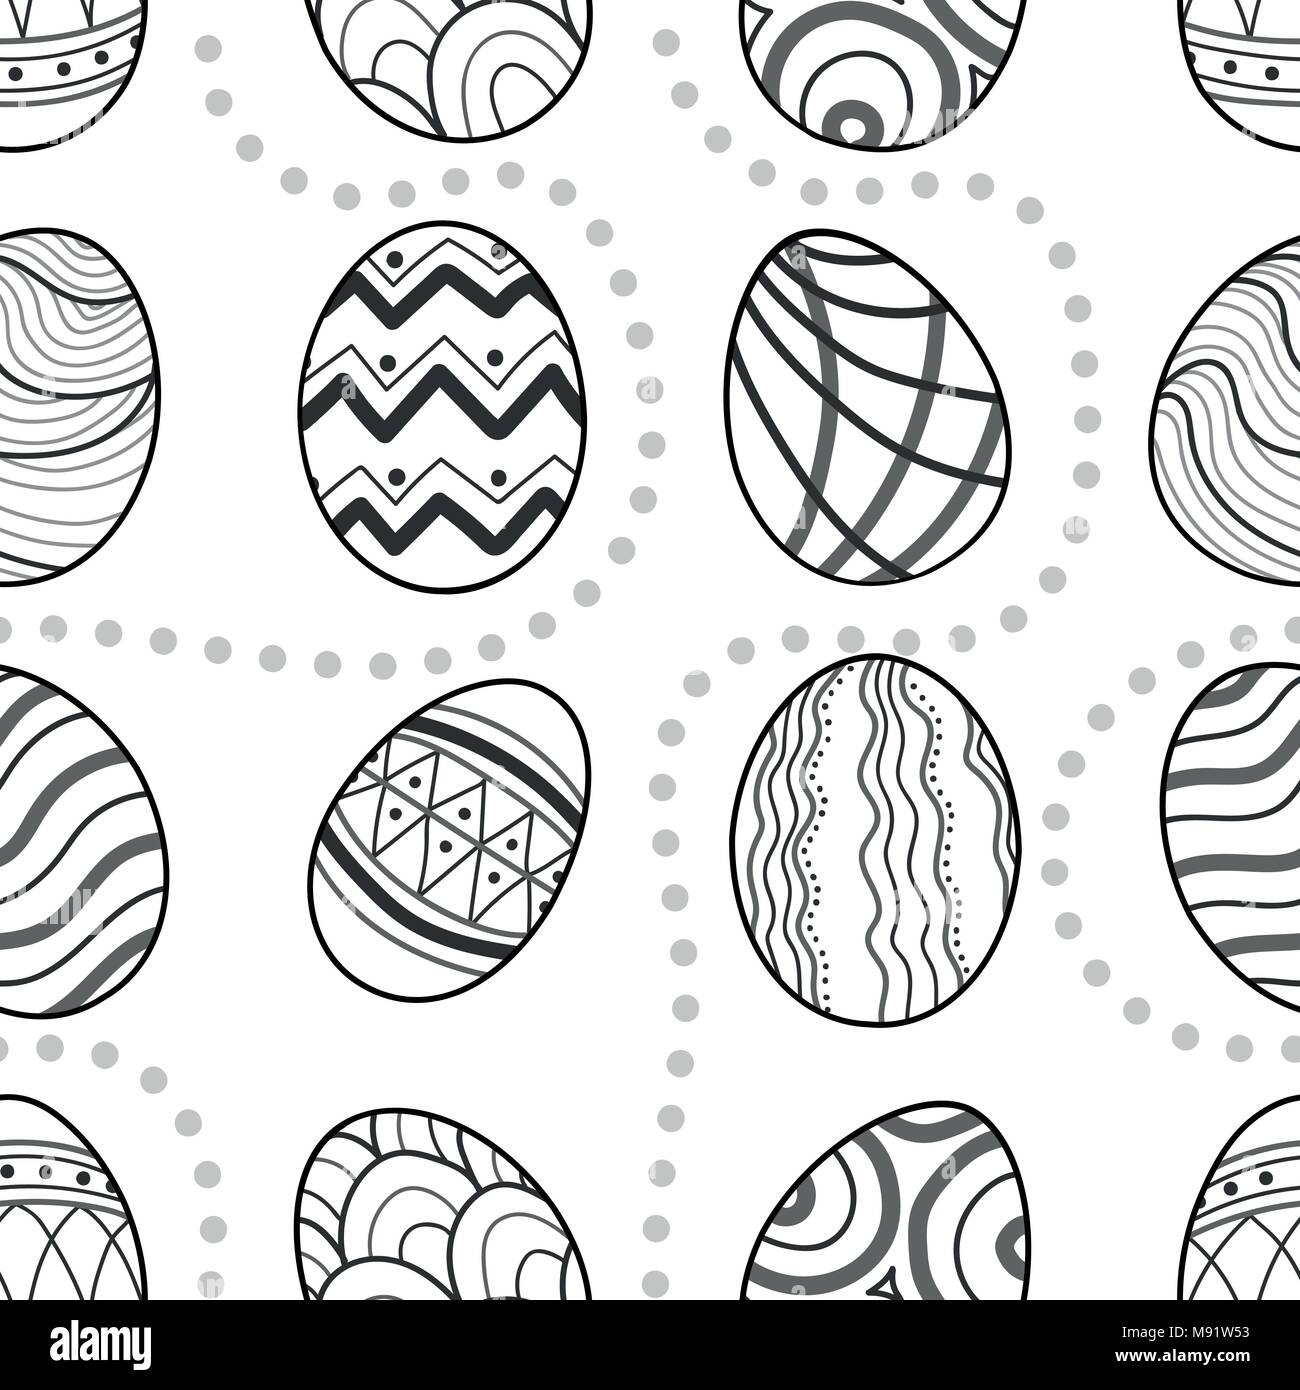 Easter eggs in black outline and dots line up on white background. Cute hand drawn seamless pattern design for Easter festival in vector illustration. Stock Vector